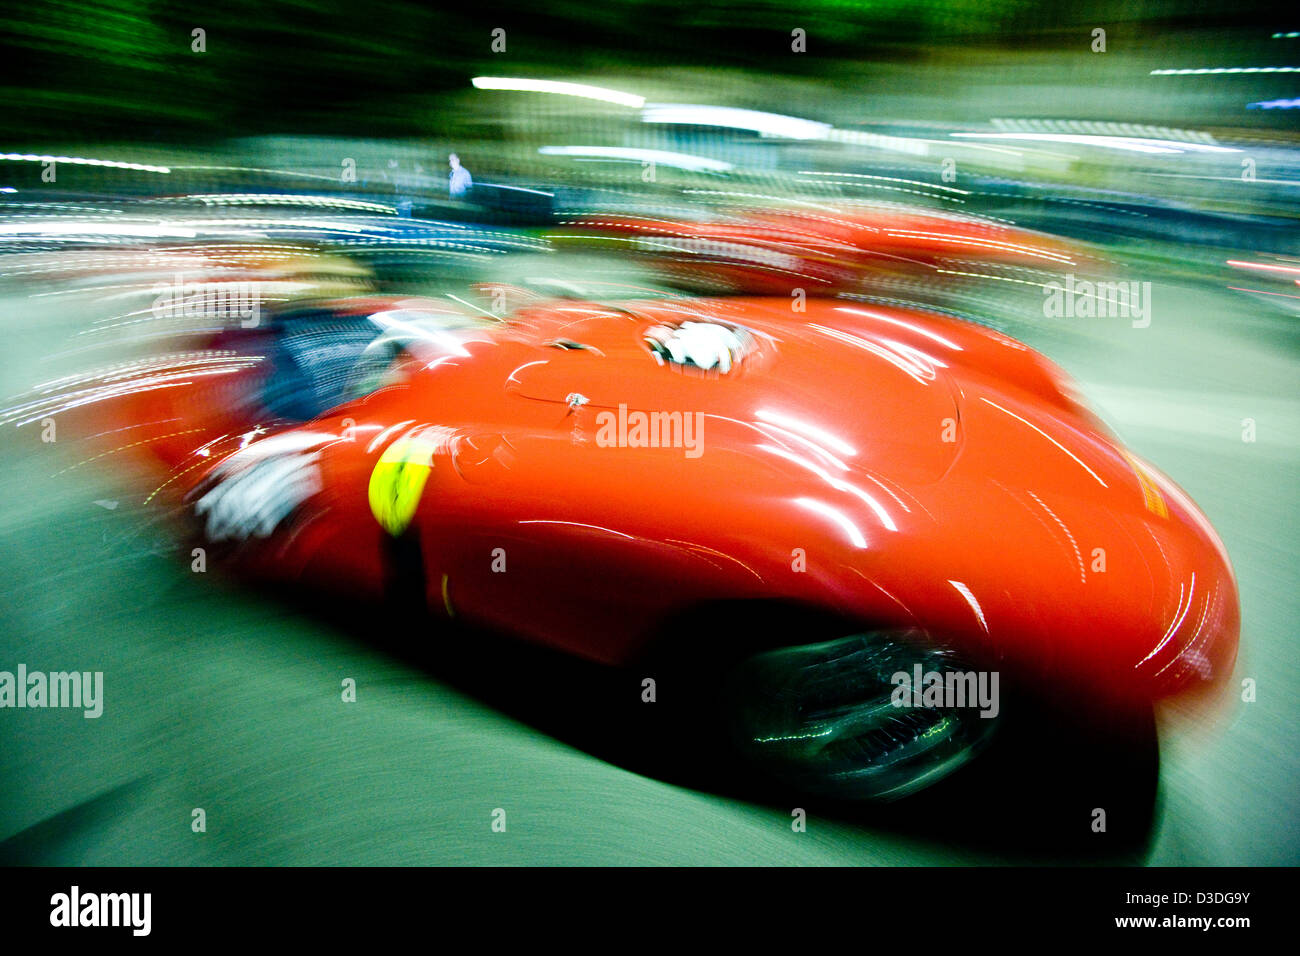 Blurry racing cars, Mille Miglia car race, Italy, 2008 Stock Photo